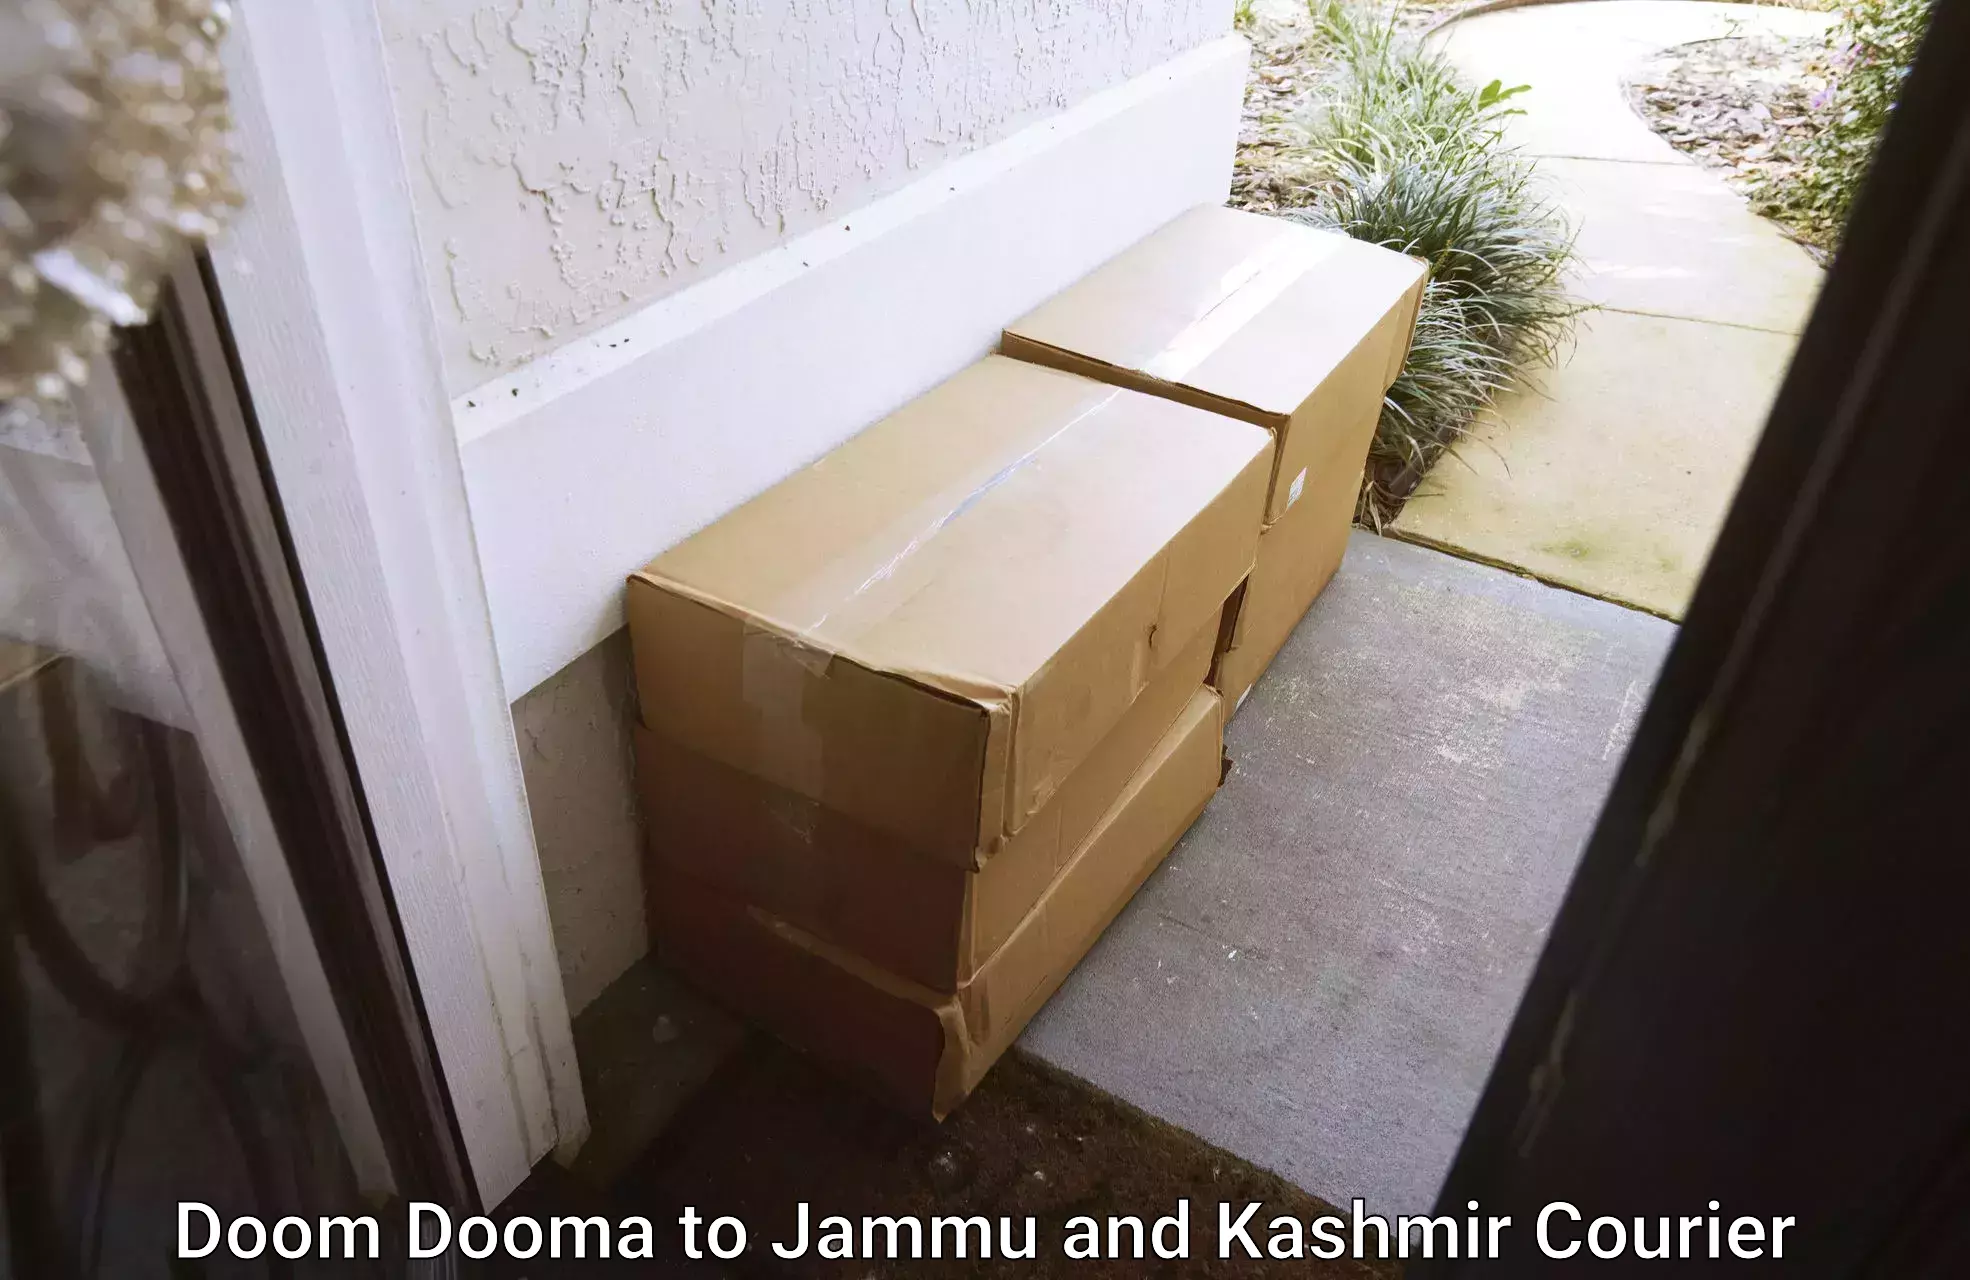 Next-day freight services Doom Dooma to Shopian